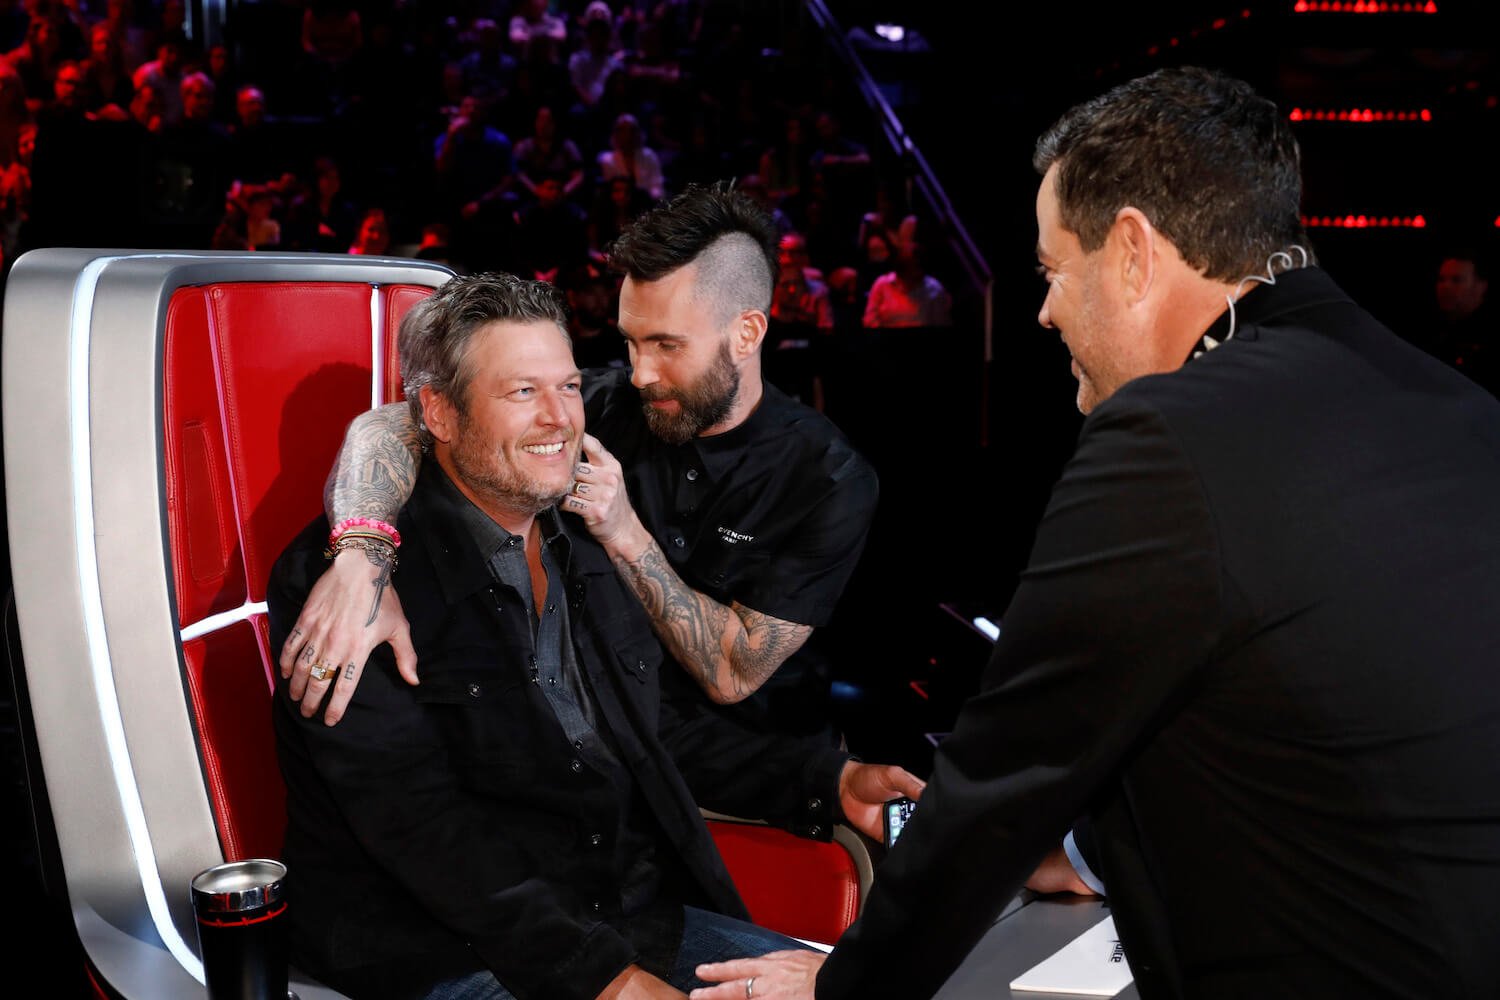 'The Voice' coaches Blake Shelton and Adam Levine with Carson Daly